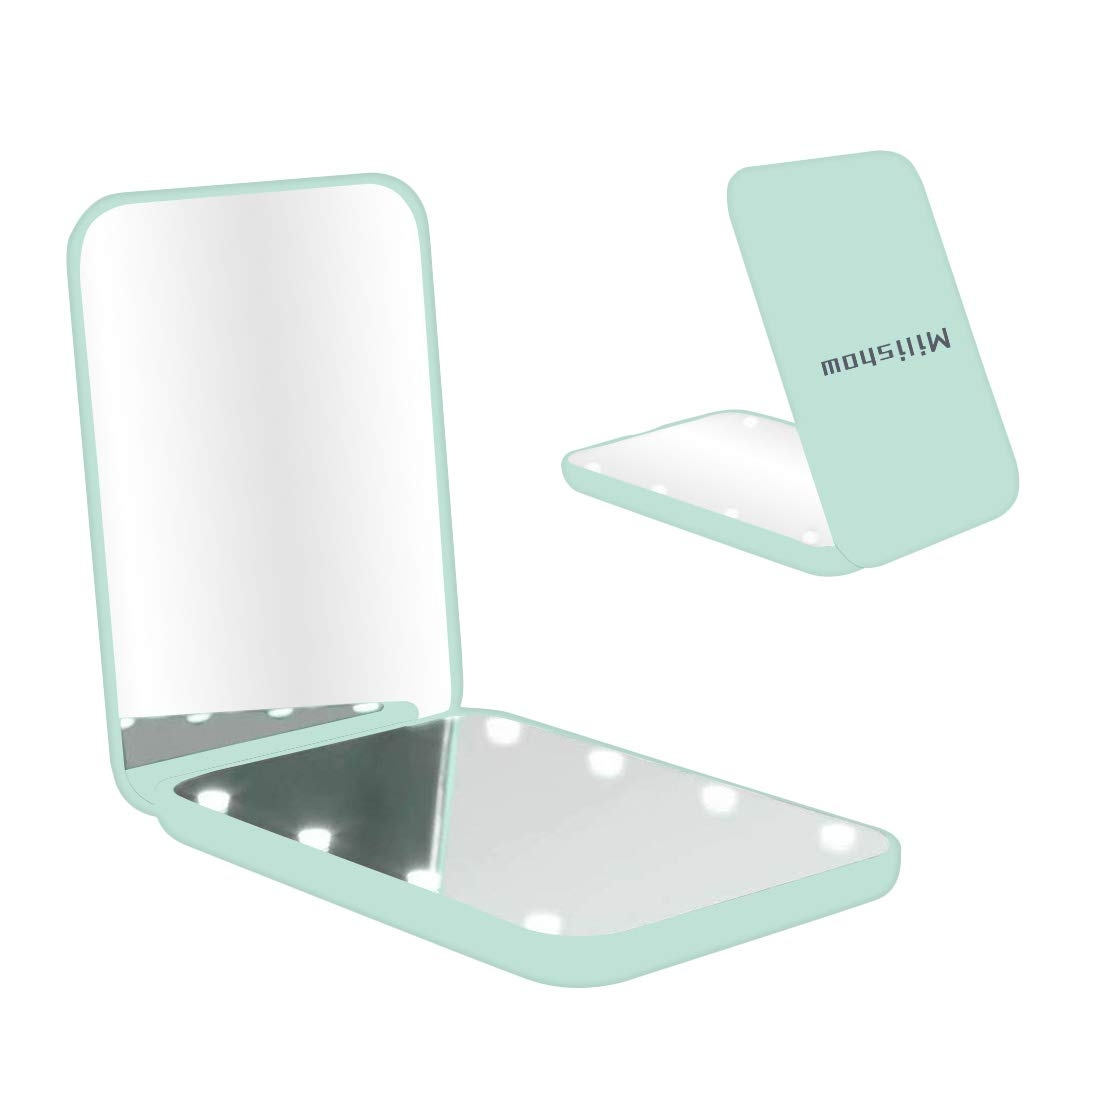 Milishow Compact Mirror with LED Light,1x/3x Magnifying Mirror, Lighted Travel Mirror for Purse,Handbag,Pocket,Handheld 2-Sided Makeup Mirror (Cyan)